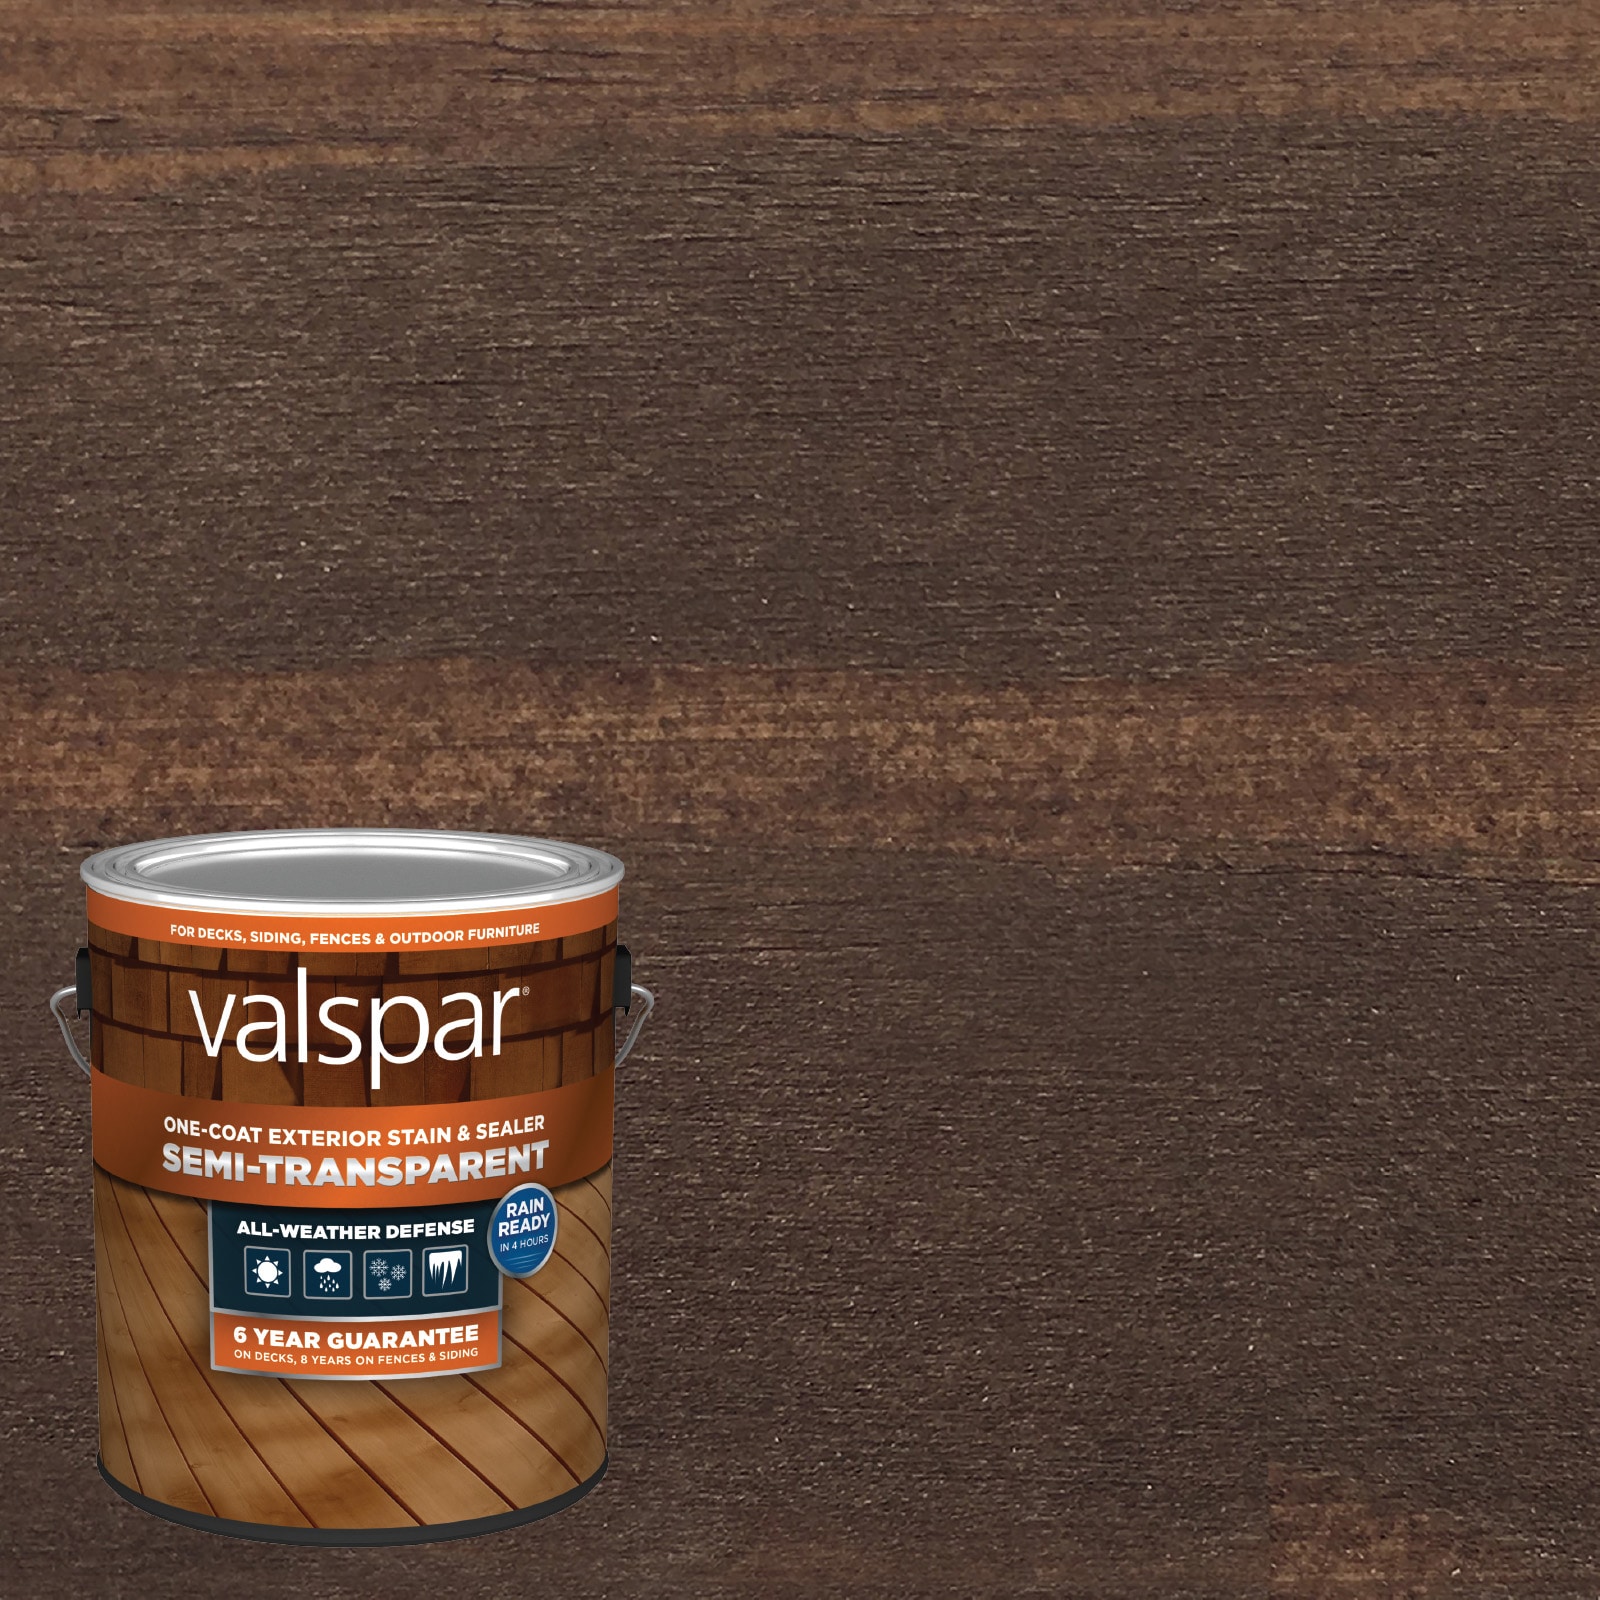 Valspar Cottage Gray Semi-transparent Exterior Wood Stain and